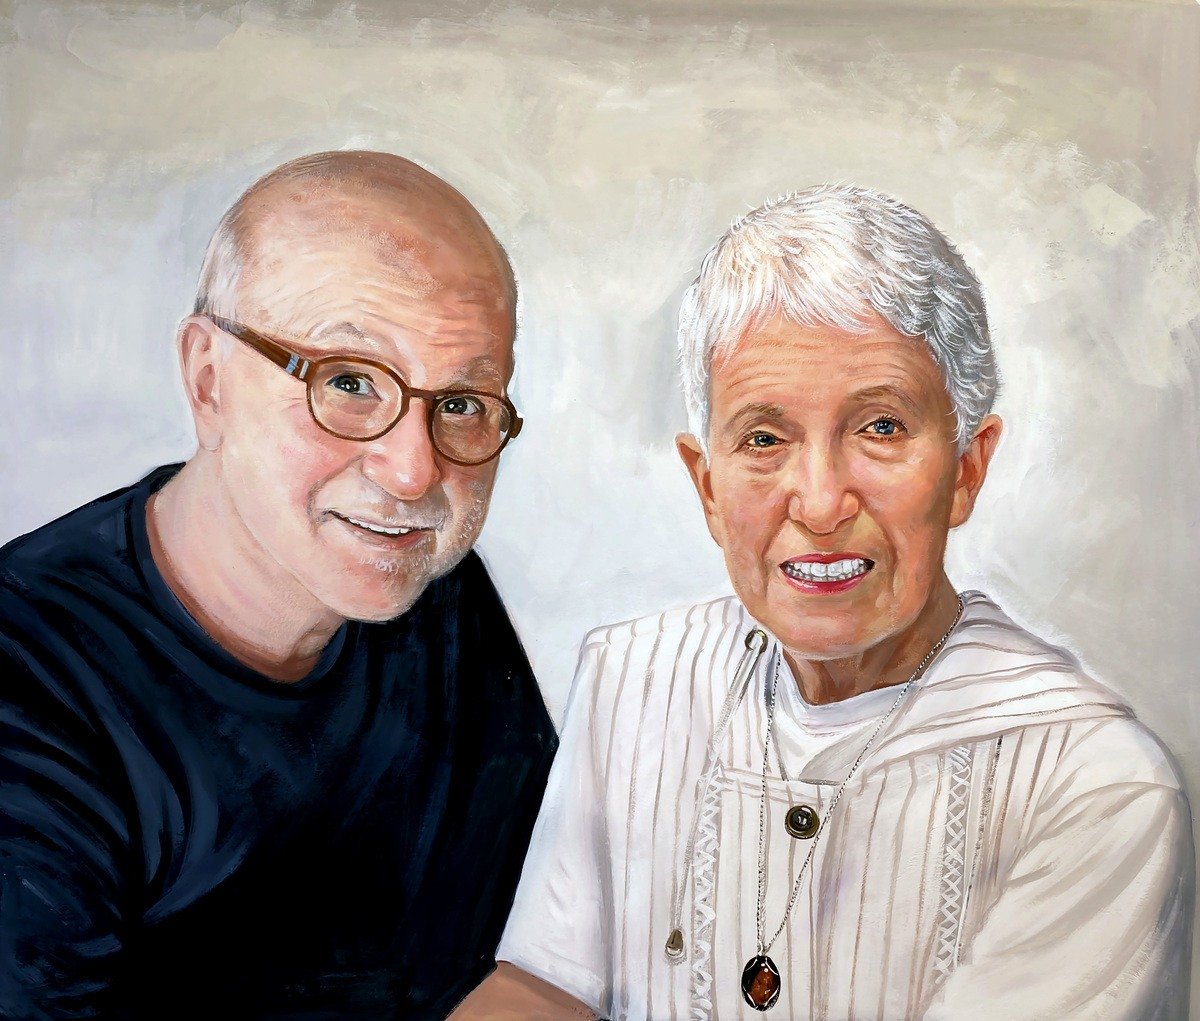 A custom retirement portrait in a pastel color style of an older man and woman.